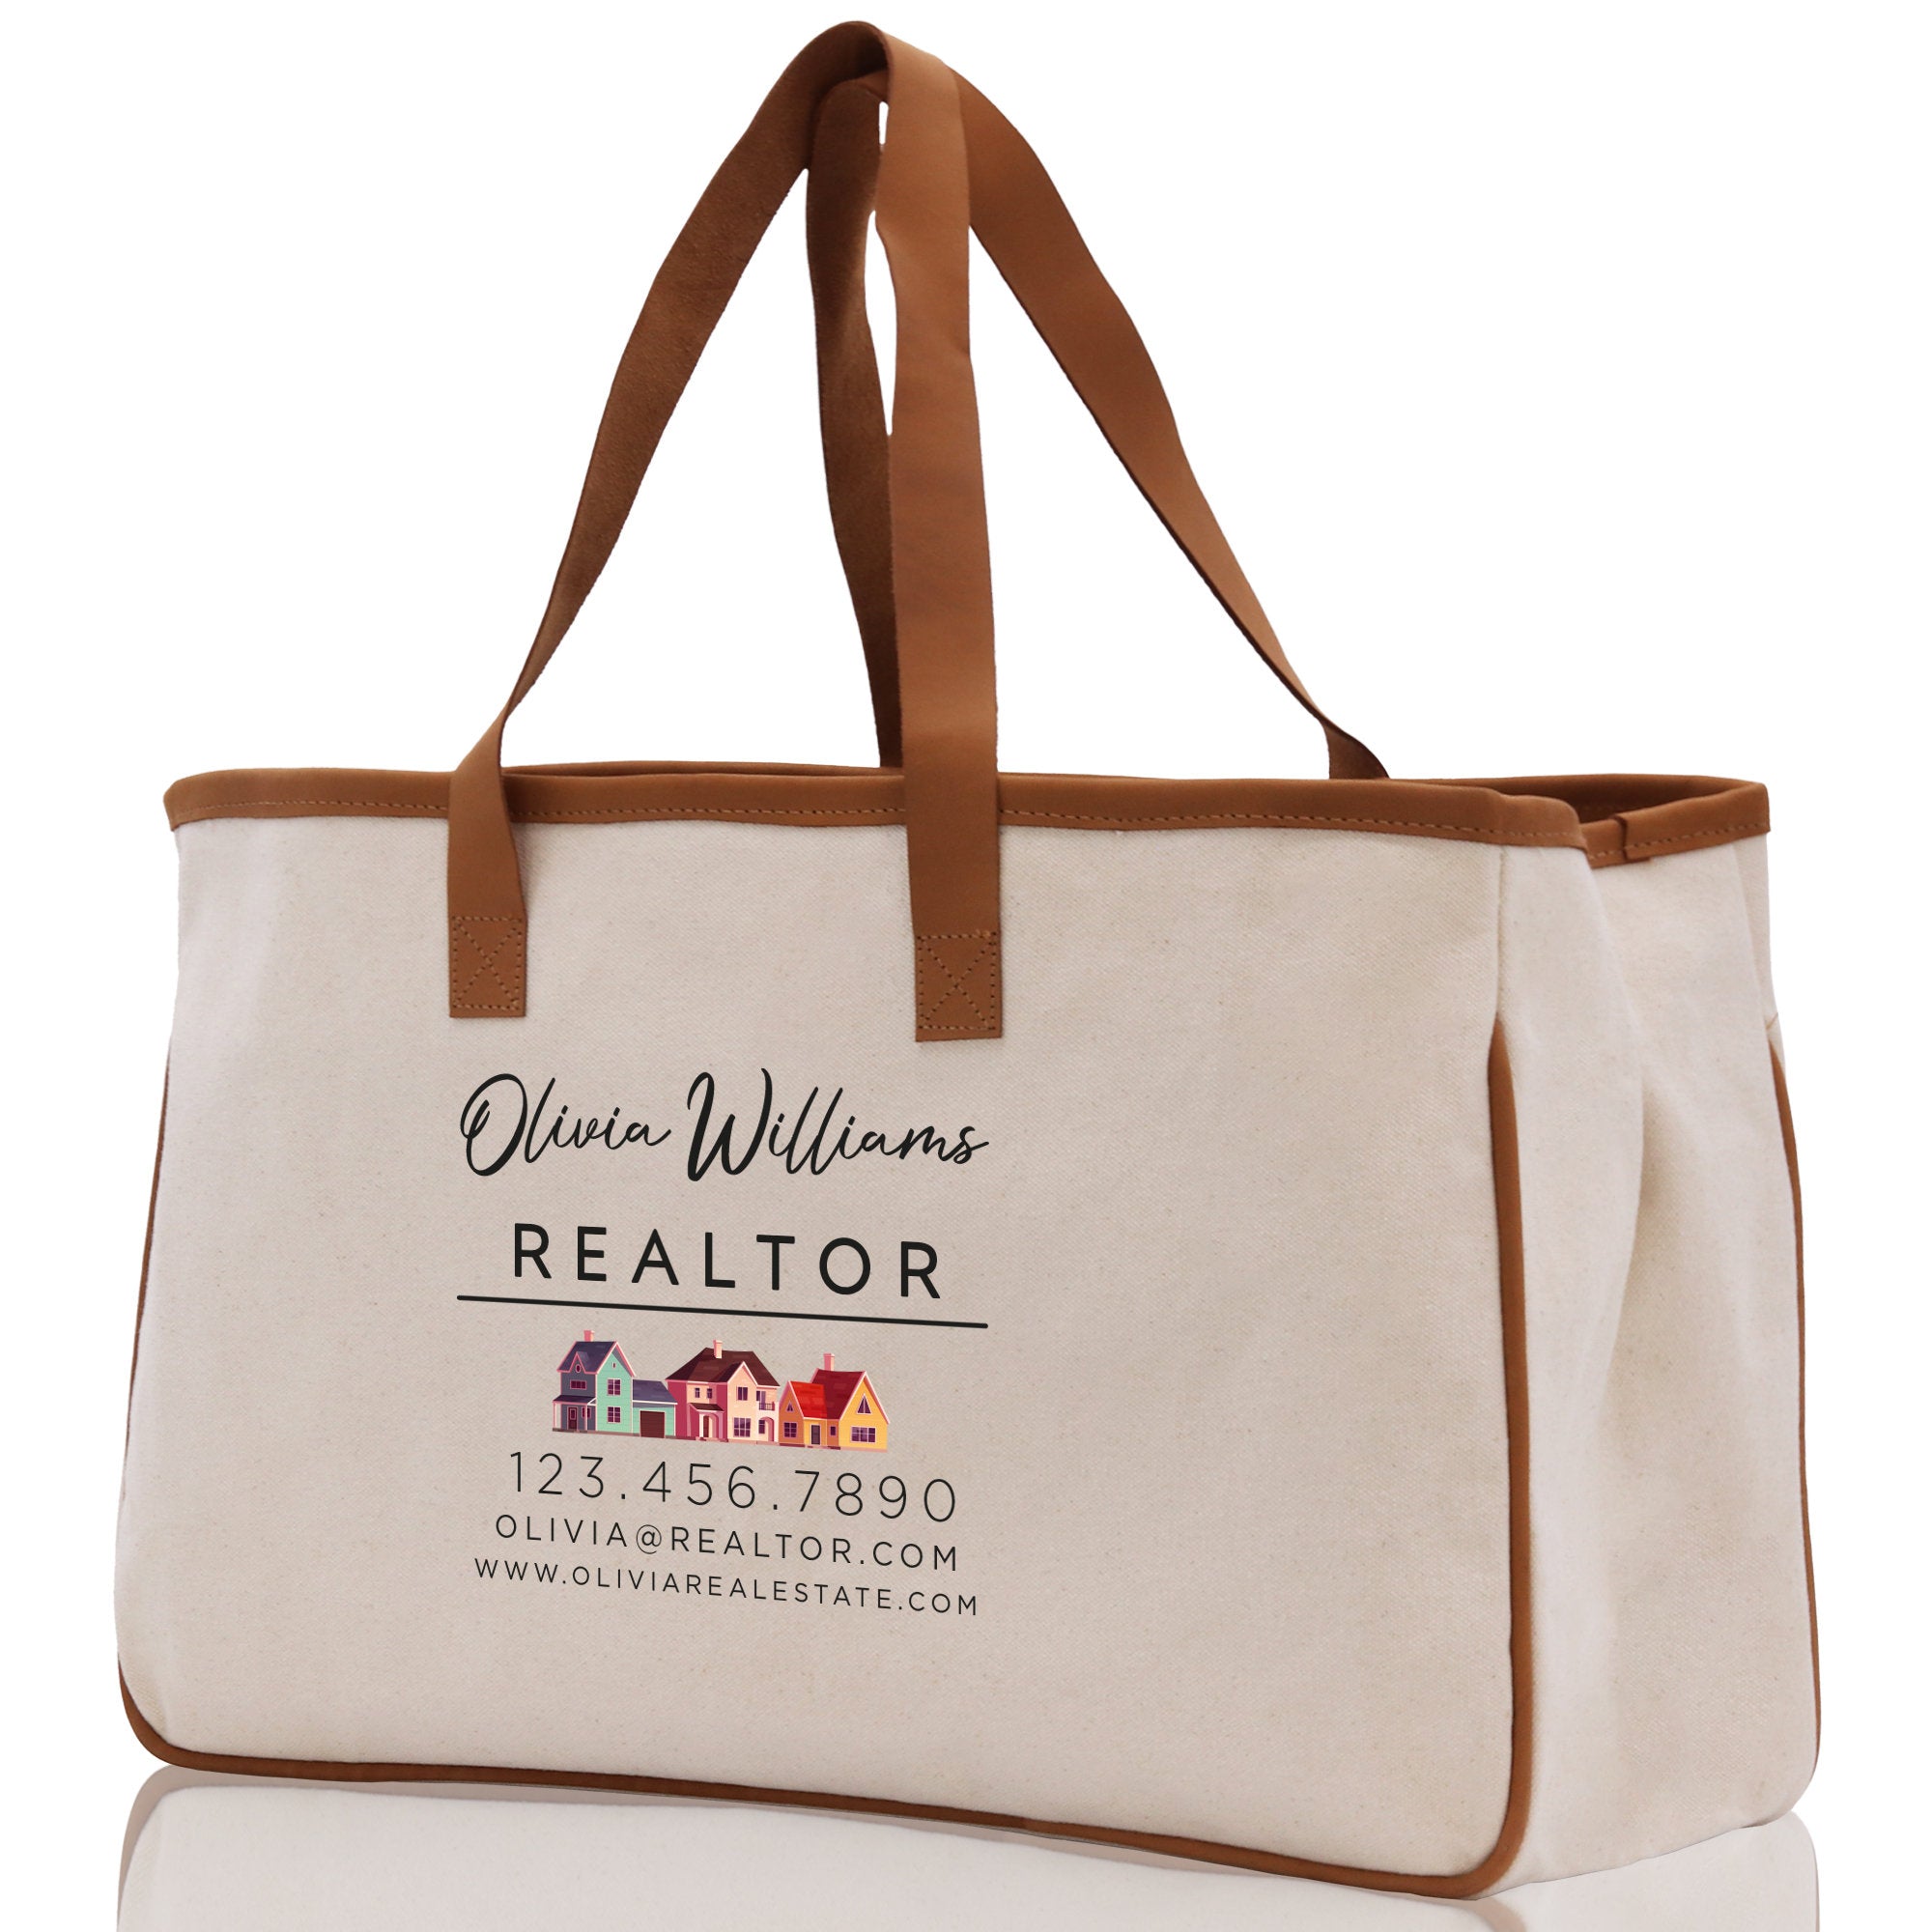 a white canvas bag with a brown leather handle